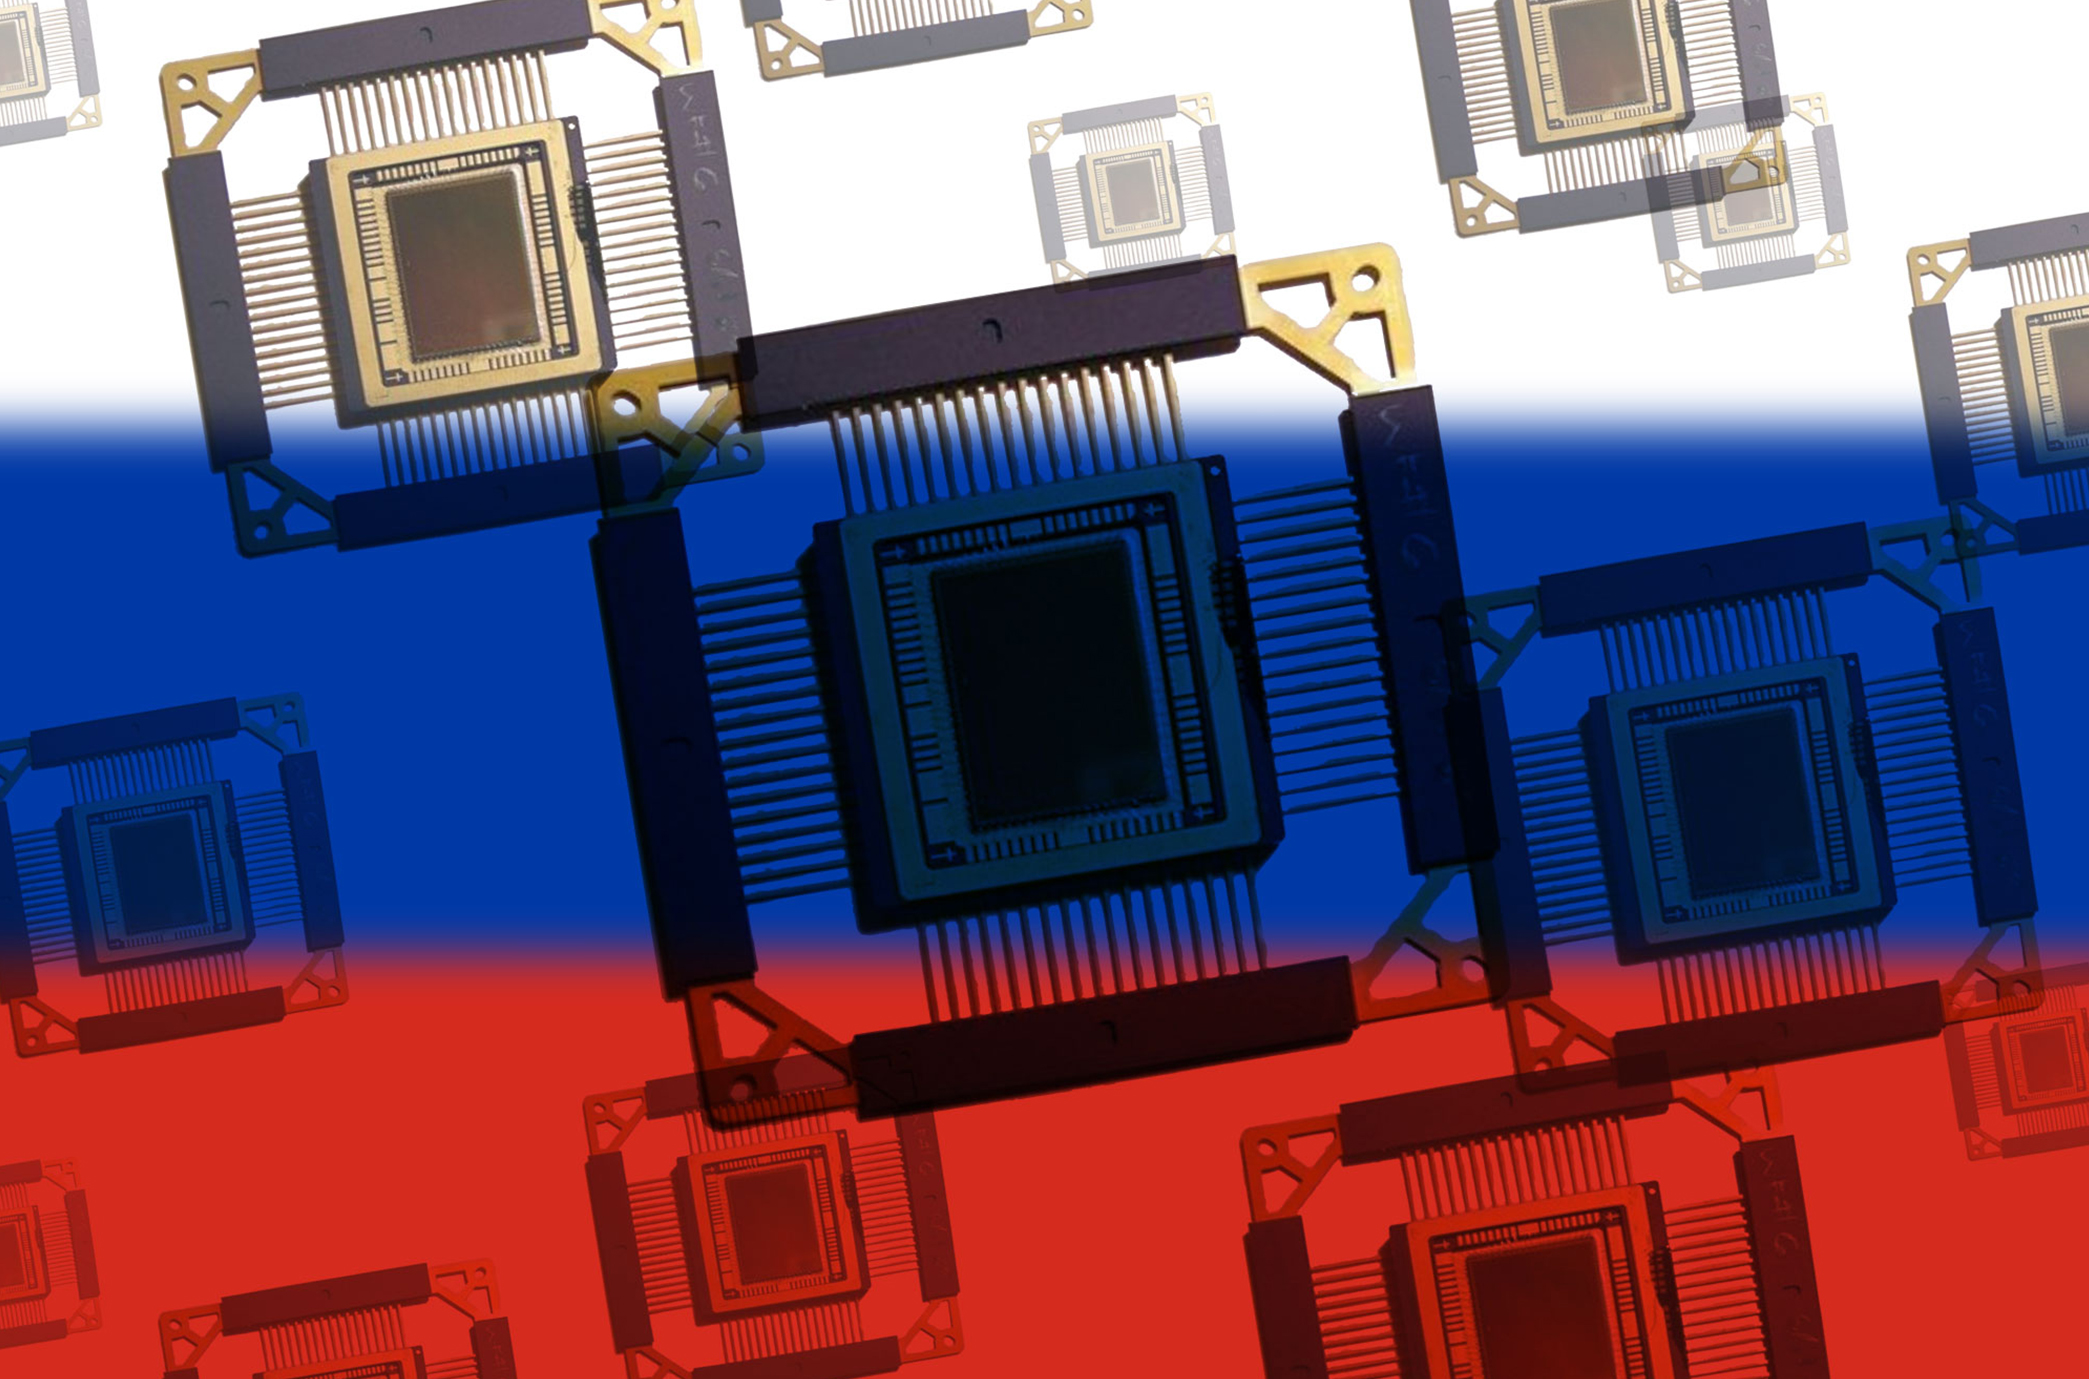 Microchips are seen with the colors of the Russian flag in an illustration